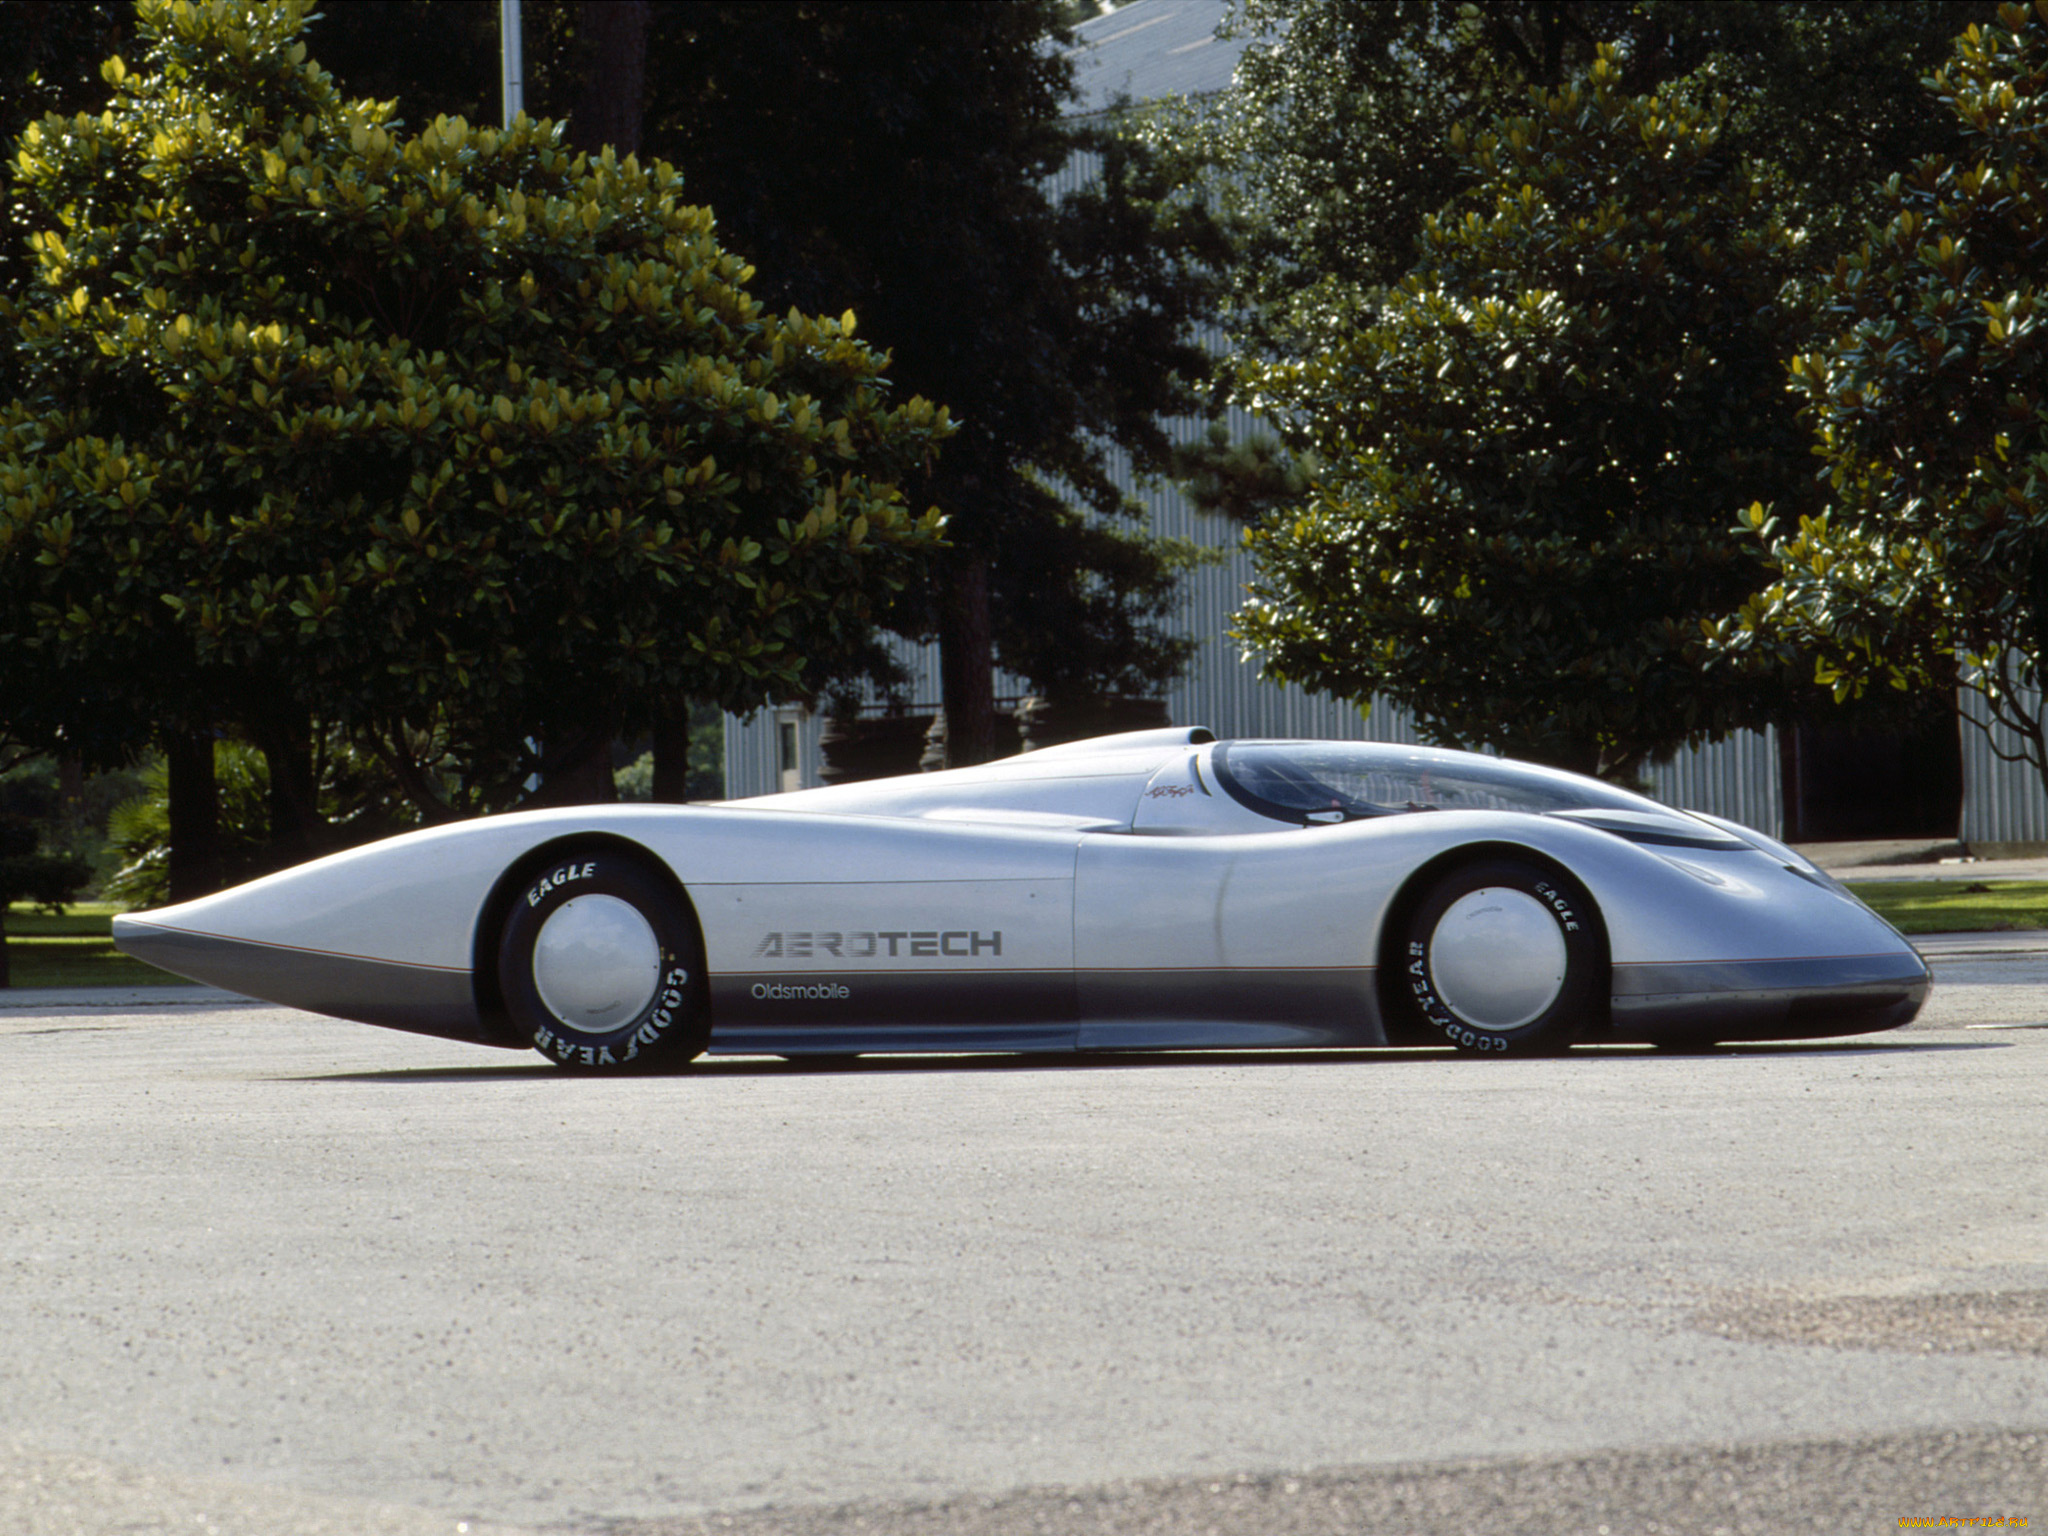 oldsmobile, aerotech-i, long, tail, concept, 1987, автомобили, oldsmobile, aerotech-i, 1987, concept, long, tail